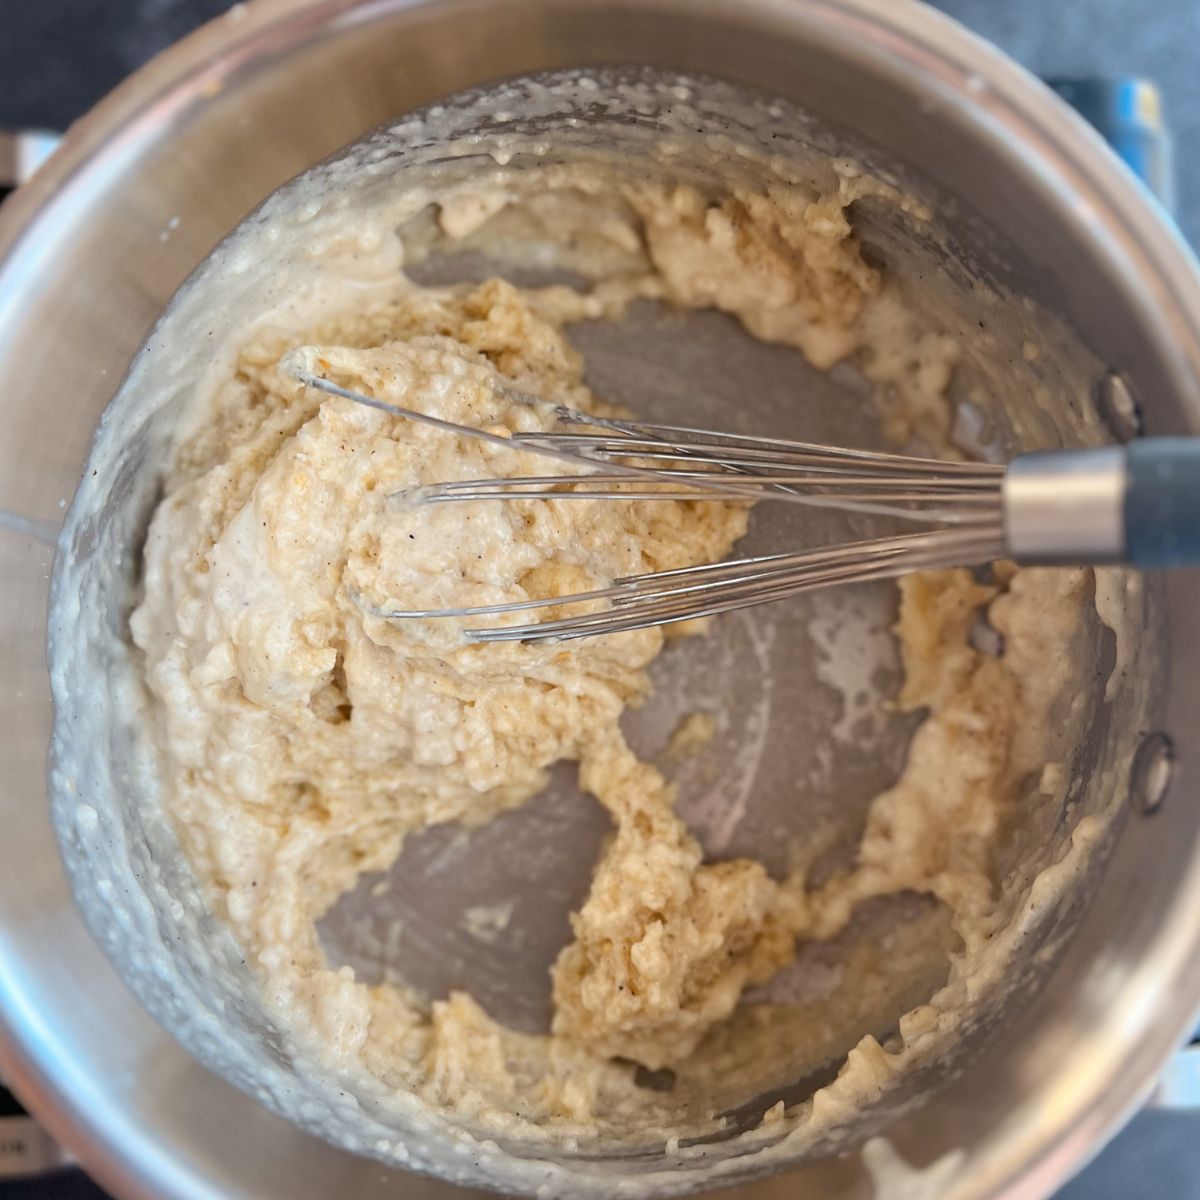 Saucepan on the stove with flour, butter, and seasonings whisked together to make a paste.